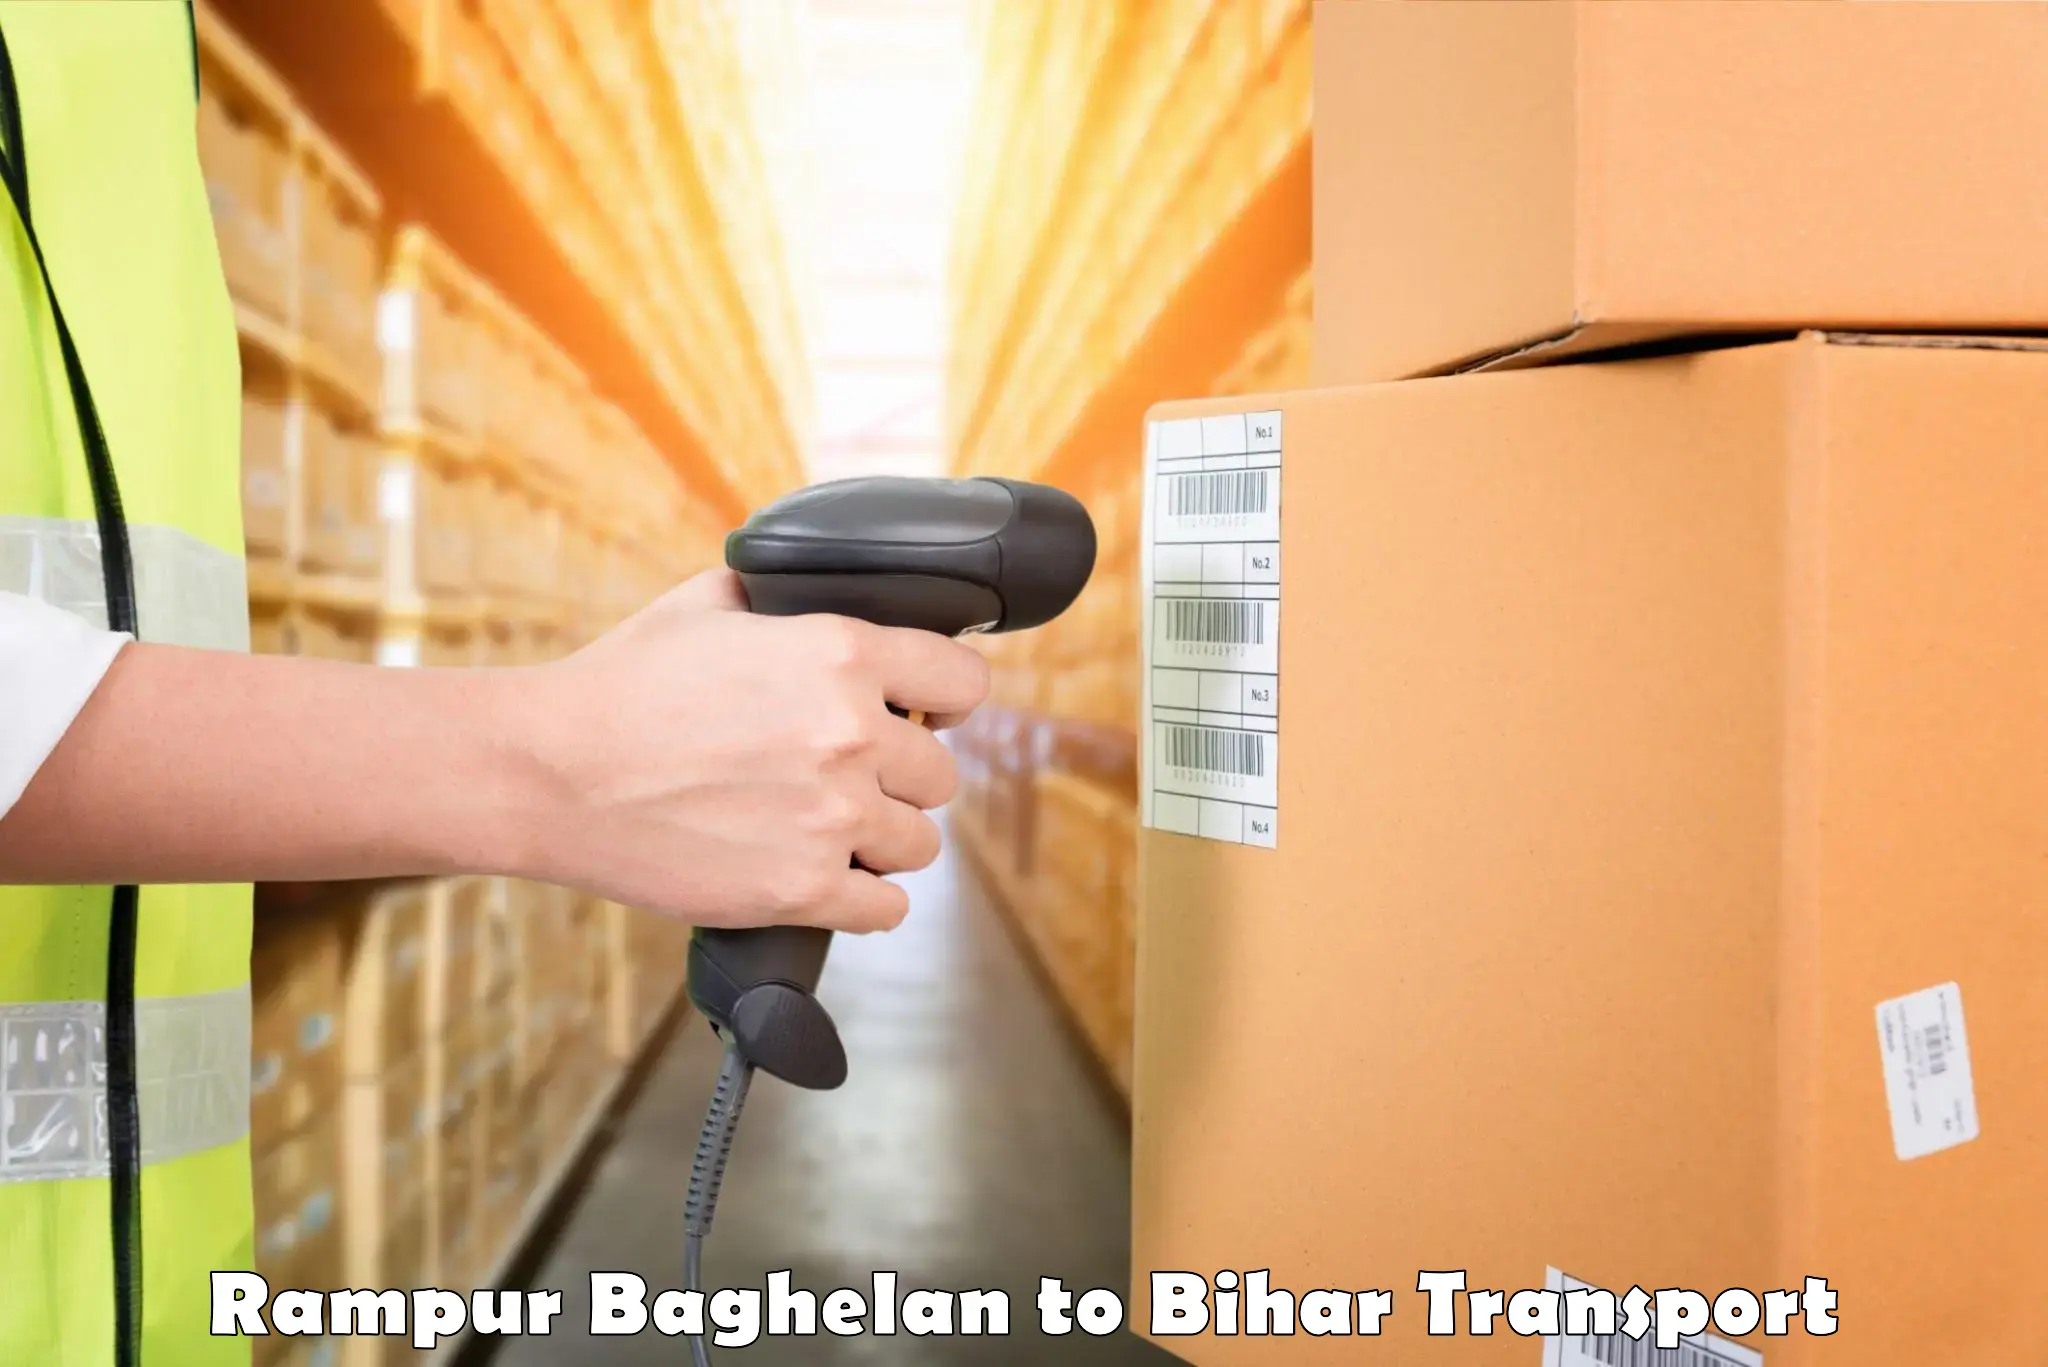 Shipping services Rampur Baghelan to Chainpur